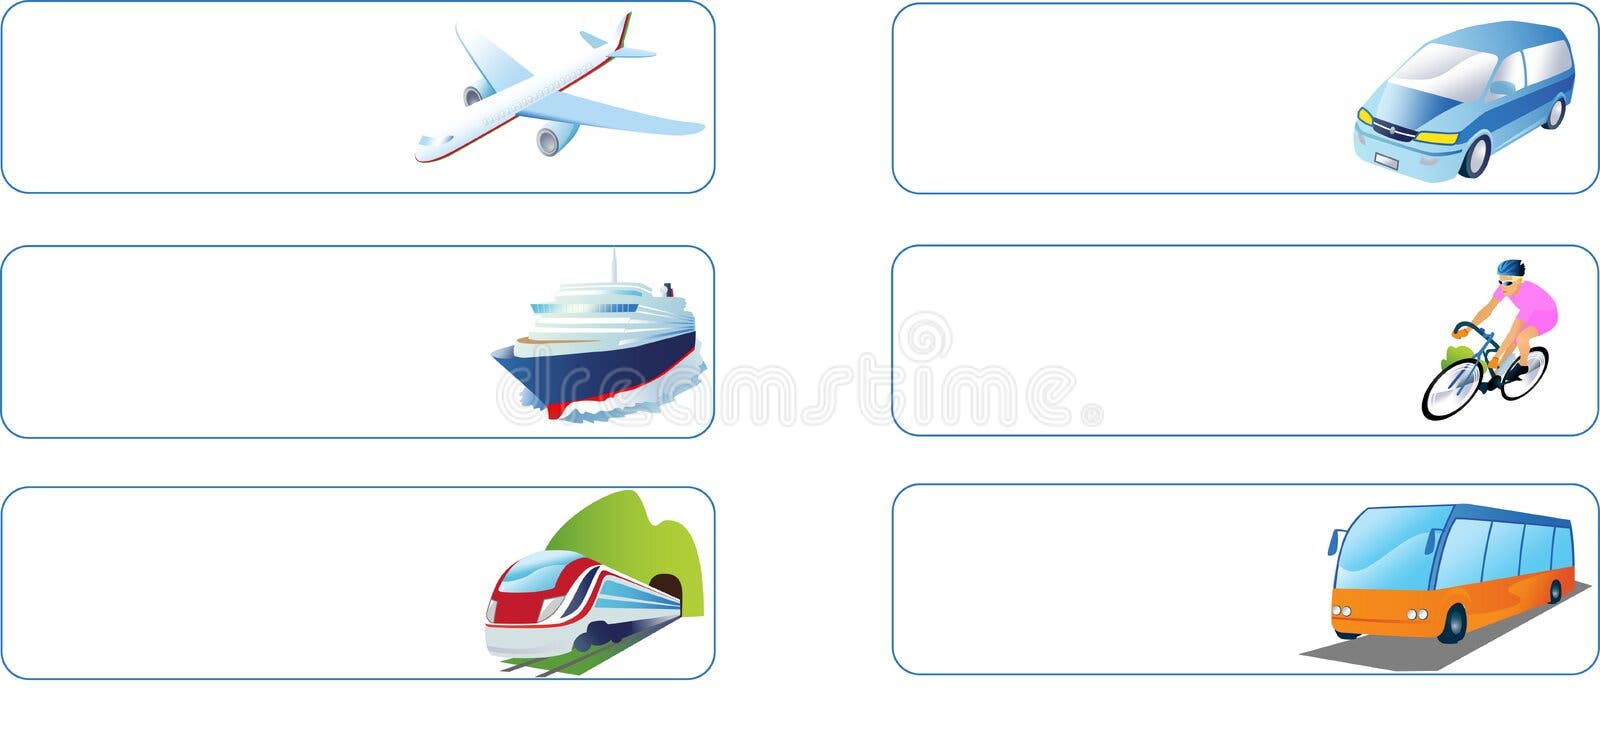 Air transport stock vector. Illustration of hydroplane - 25933004